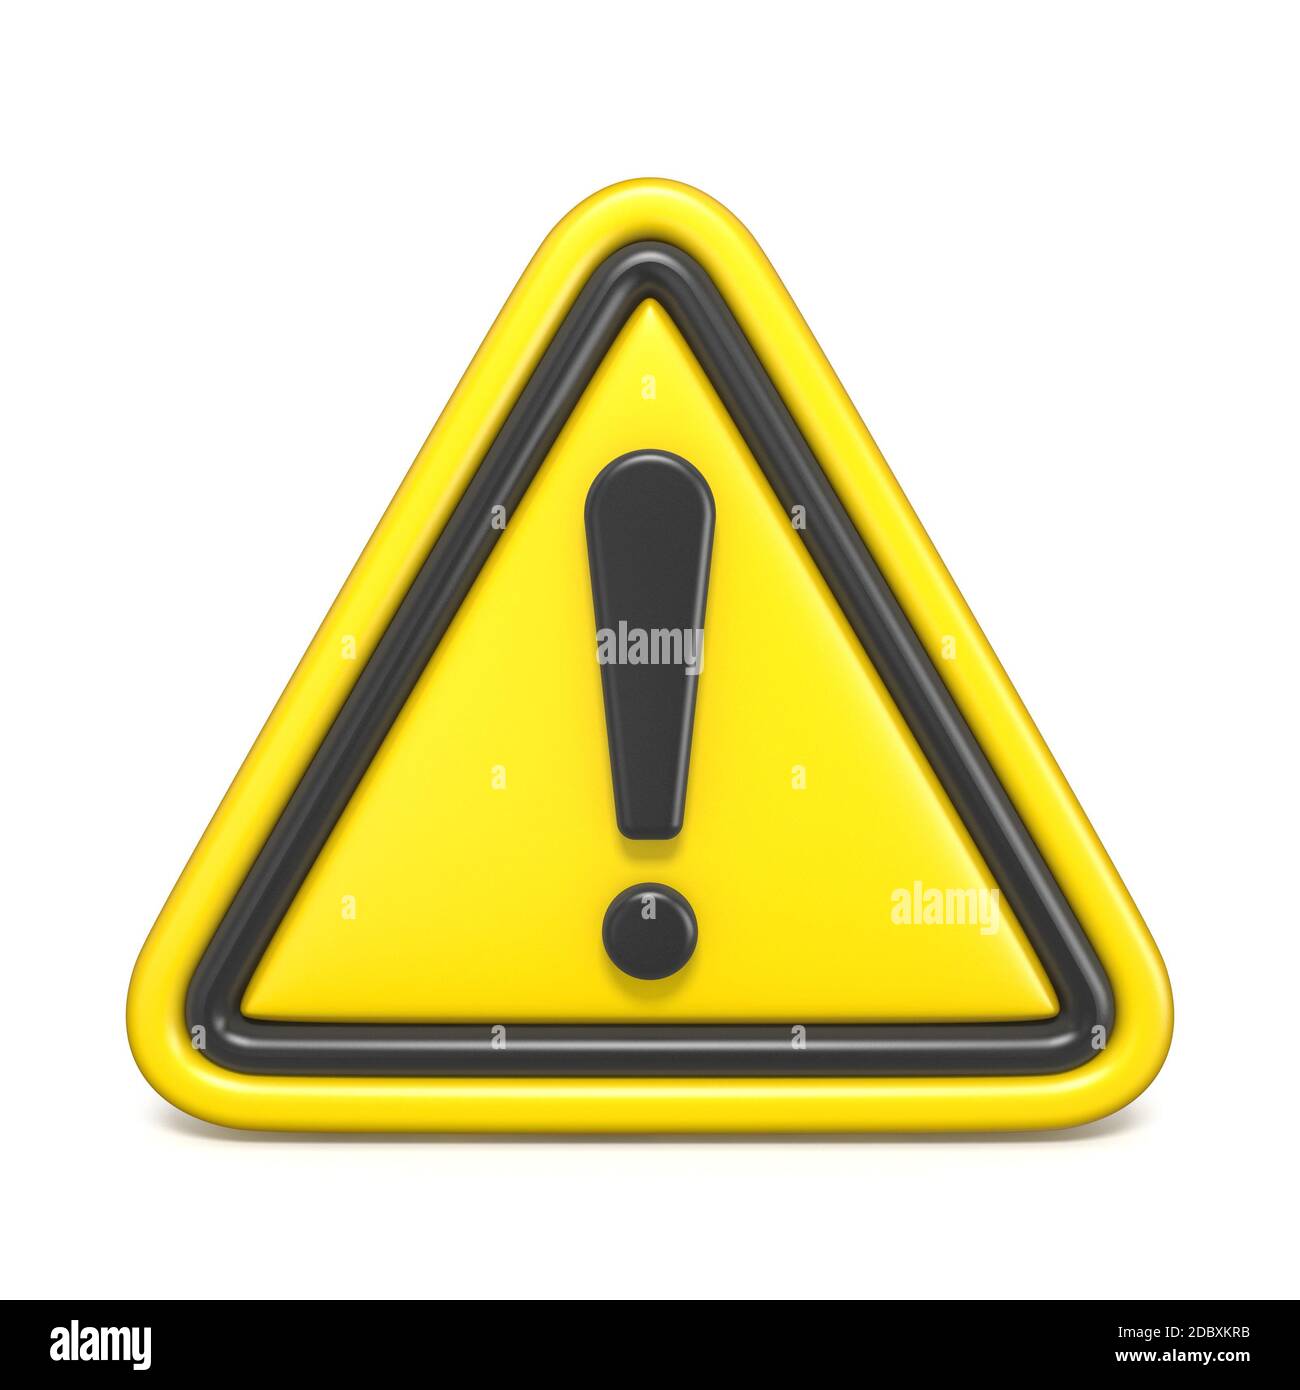 Attention sign 3D render illustration isolated on white background ...